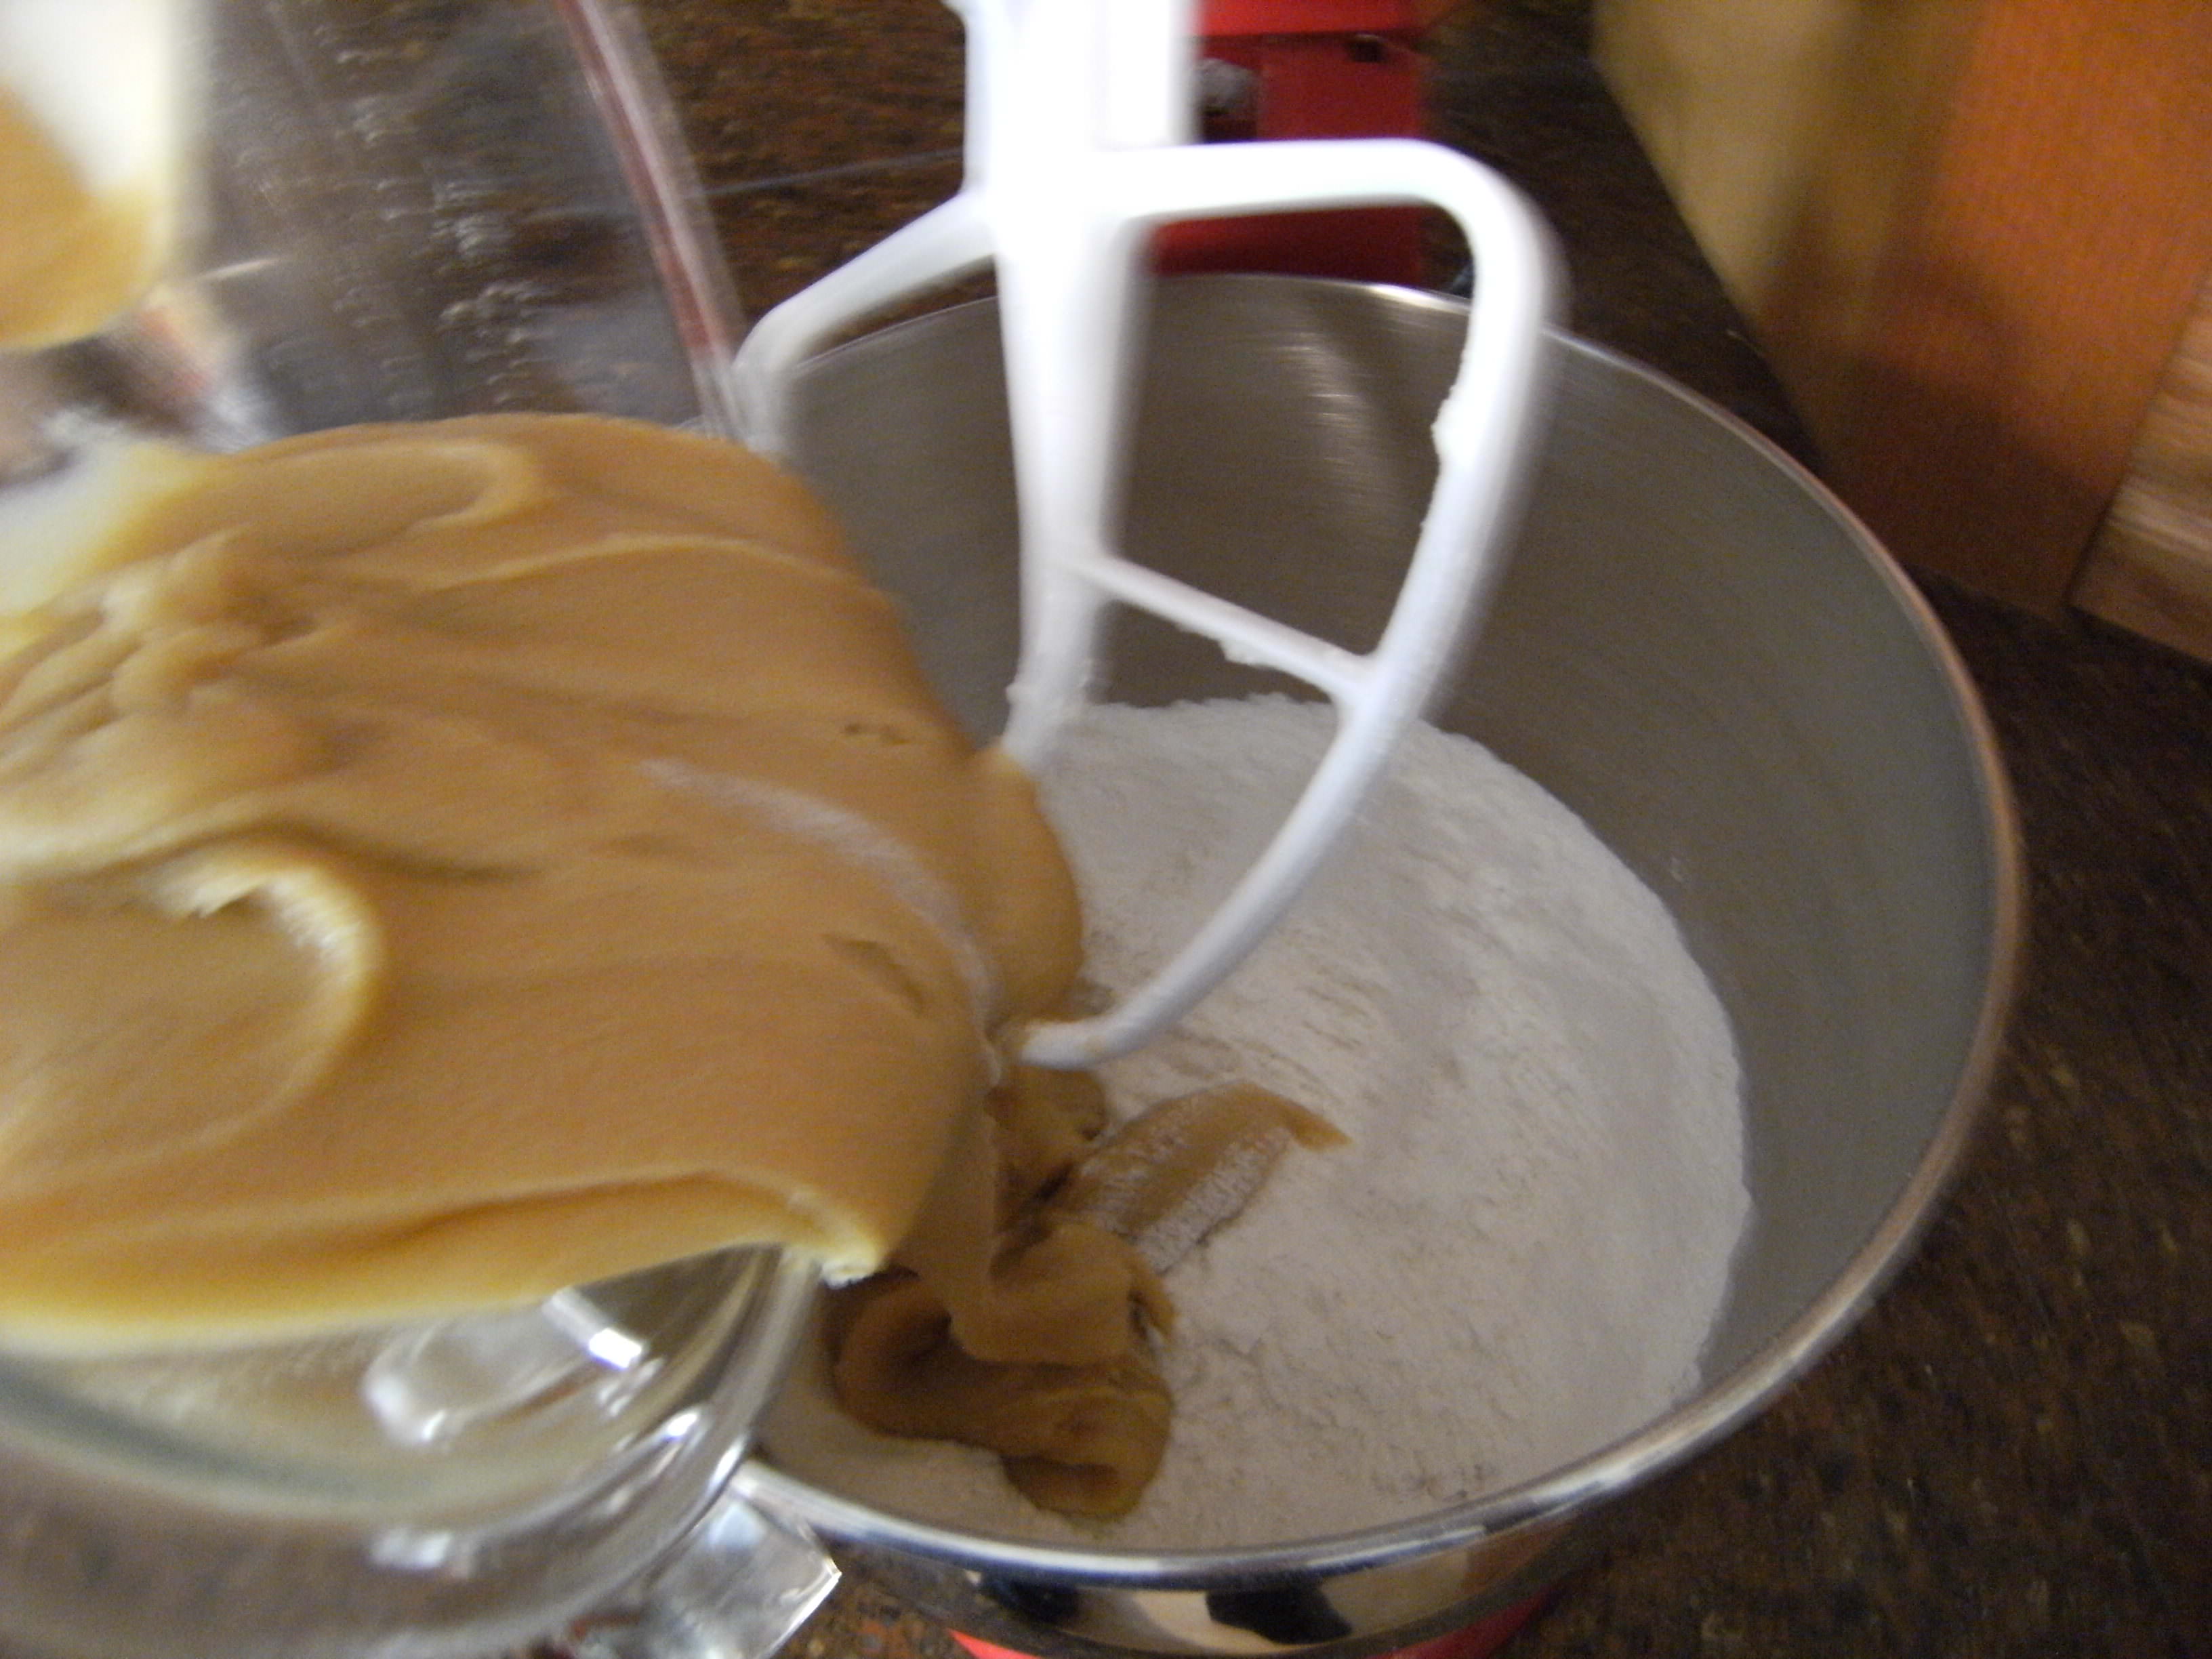 pouring wet ingredients into dry ingredients for a batch of my favorite chocolate chip cookies